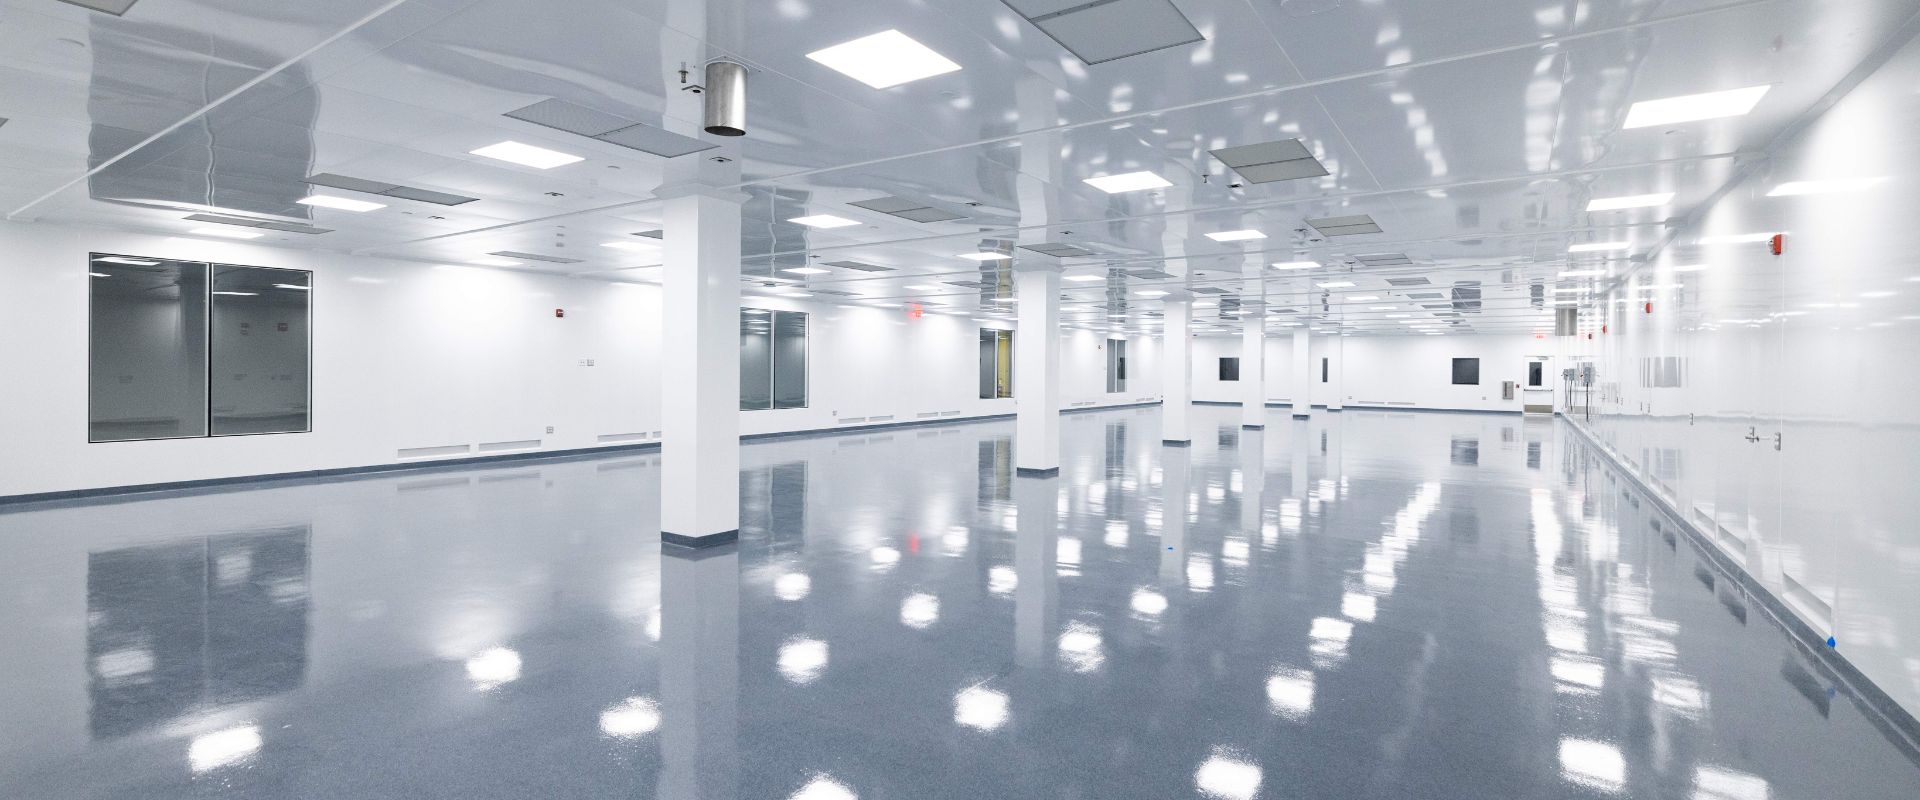 Expandable cleanrooms for easy scale up